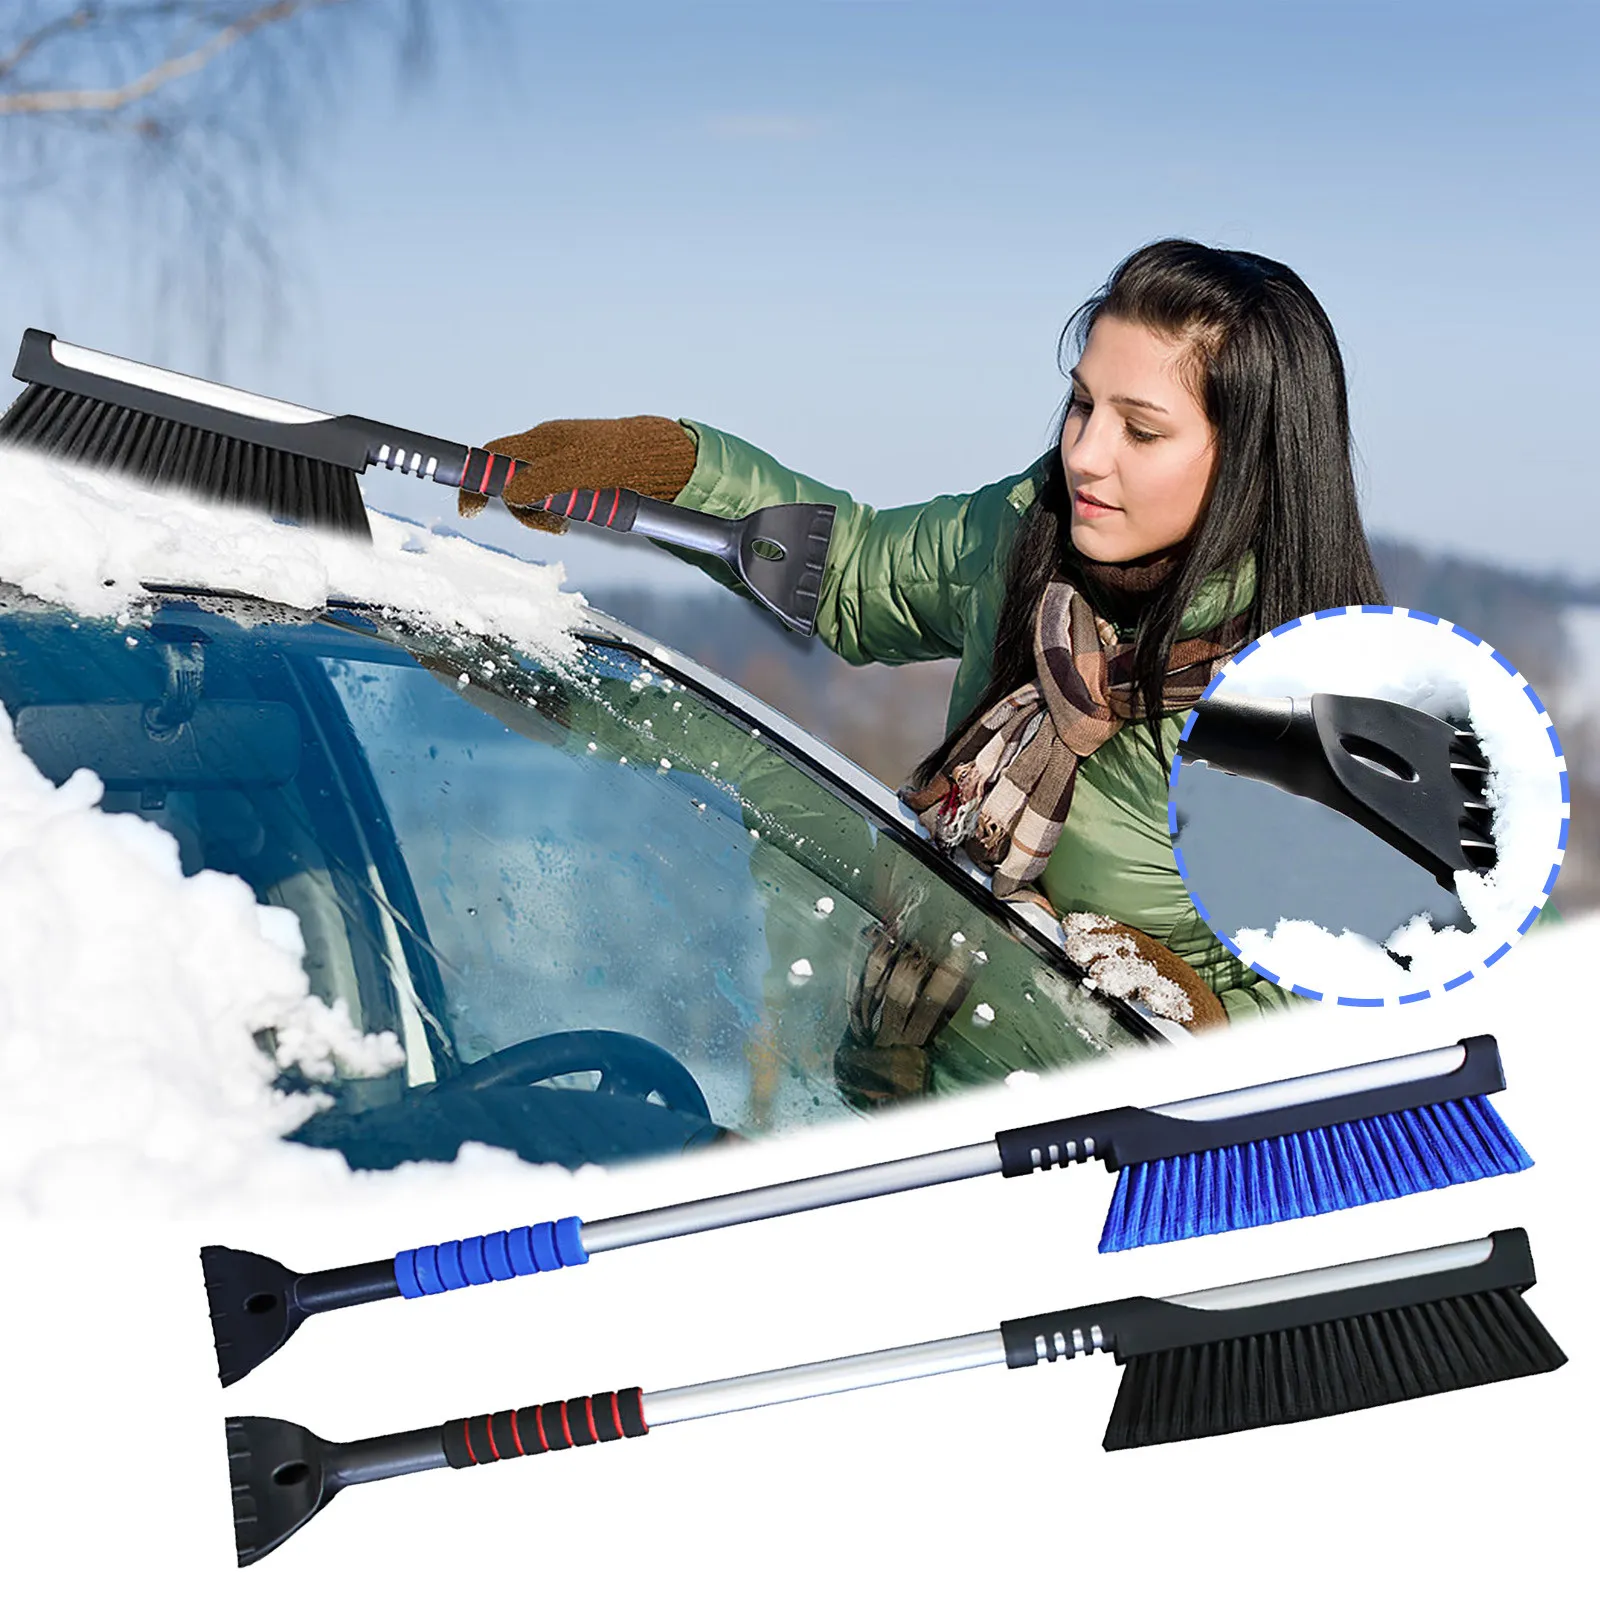 2 In 1 Car Snow Brush And Snow Broom Ice Scraper With Extendable Broom For  Windshield And Glass Cleaning From Otolampara, $4.63